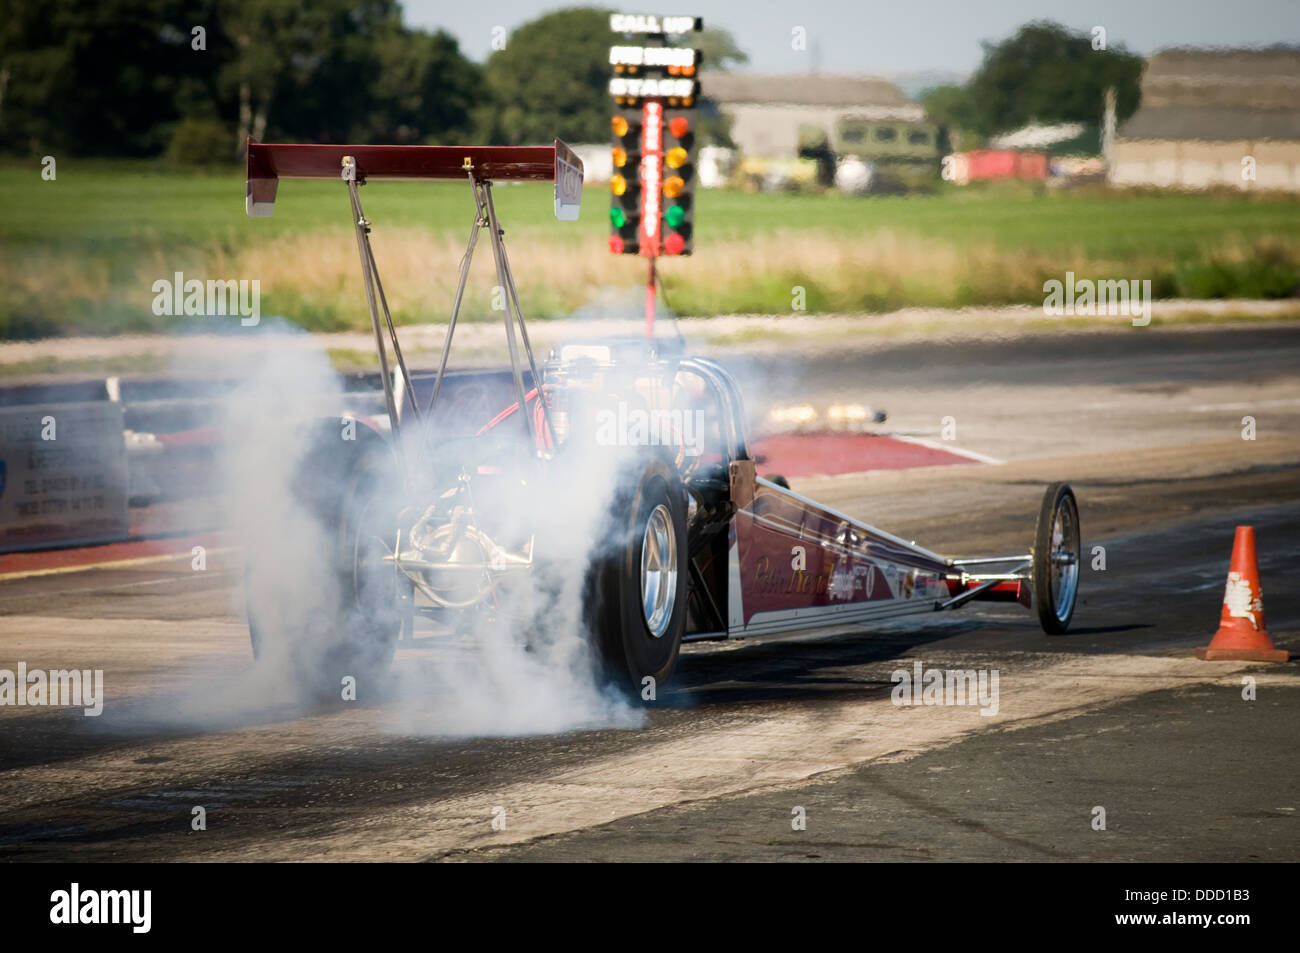 dragster heating its tires before a race Stock Photo